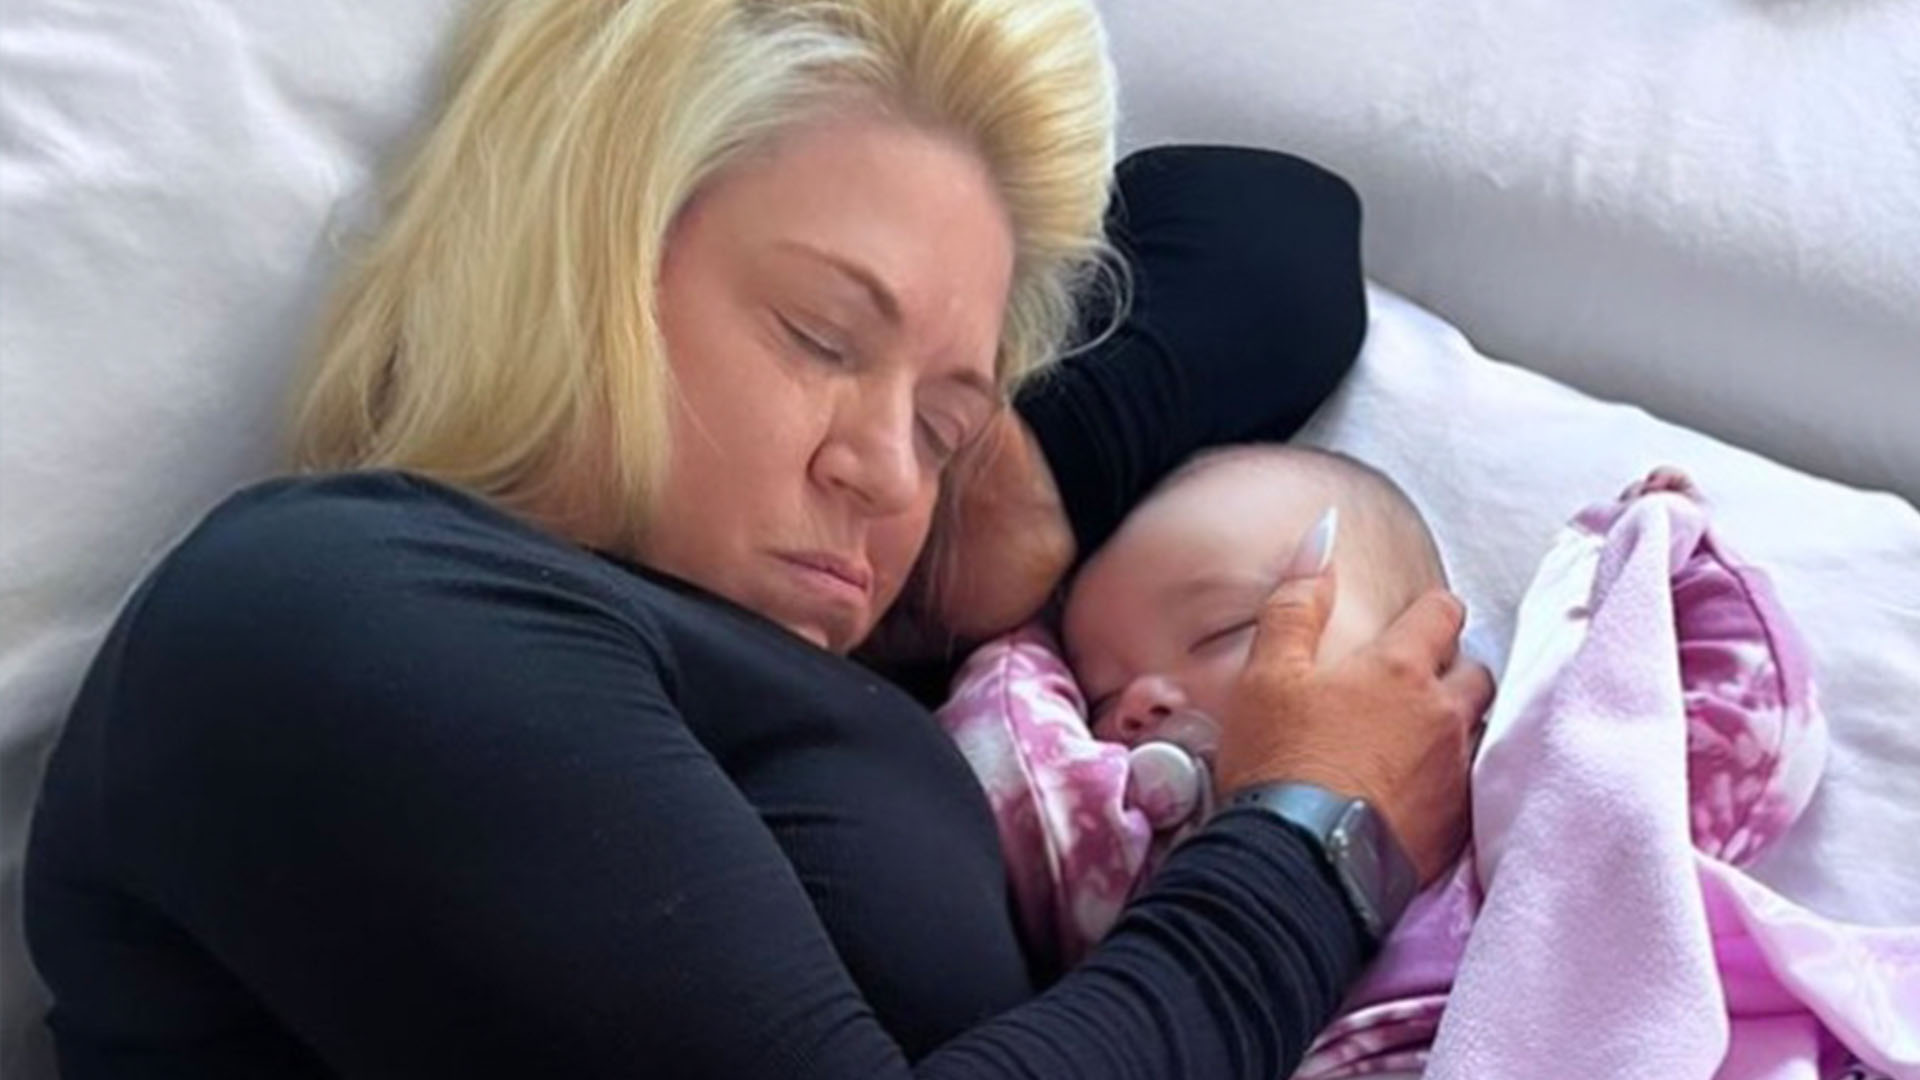 Long Island Medium Theresa Caputo puts hand near baby granddaughter’s eye after star is ripped for ‘dangerous’ nails